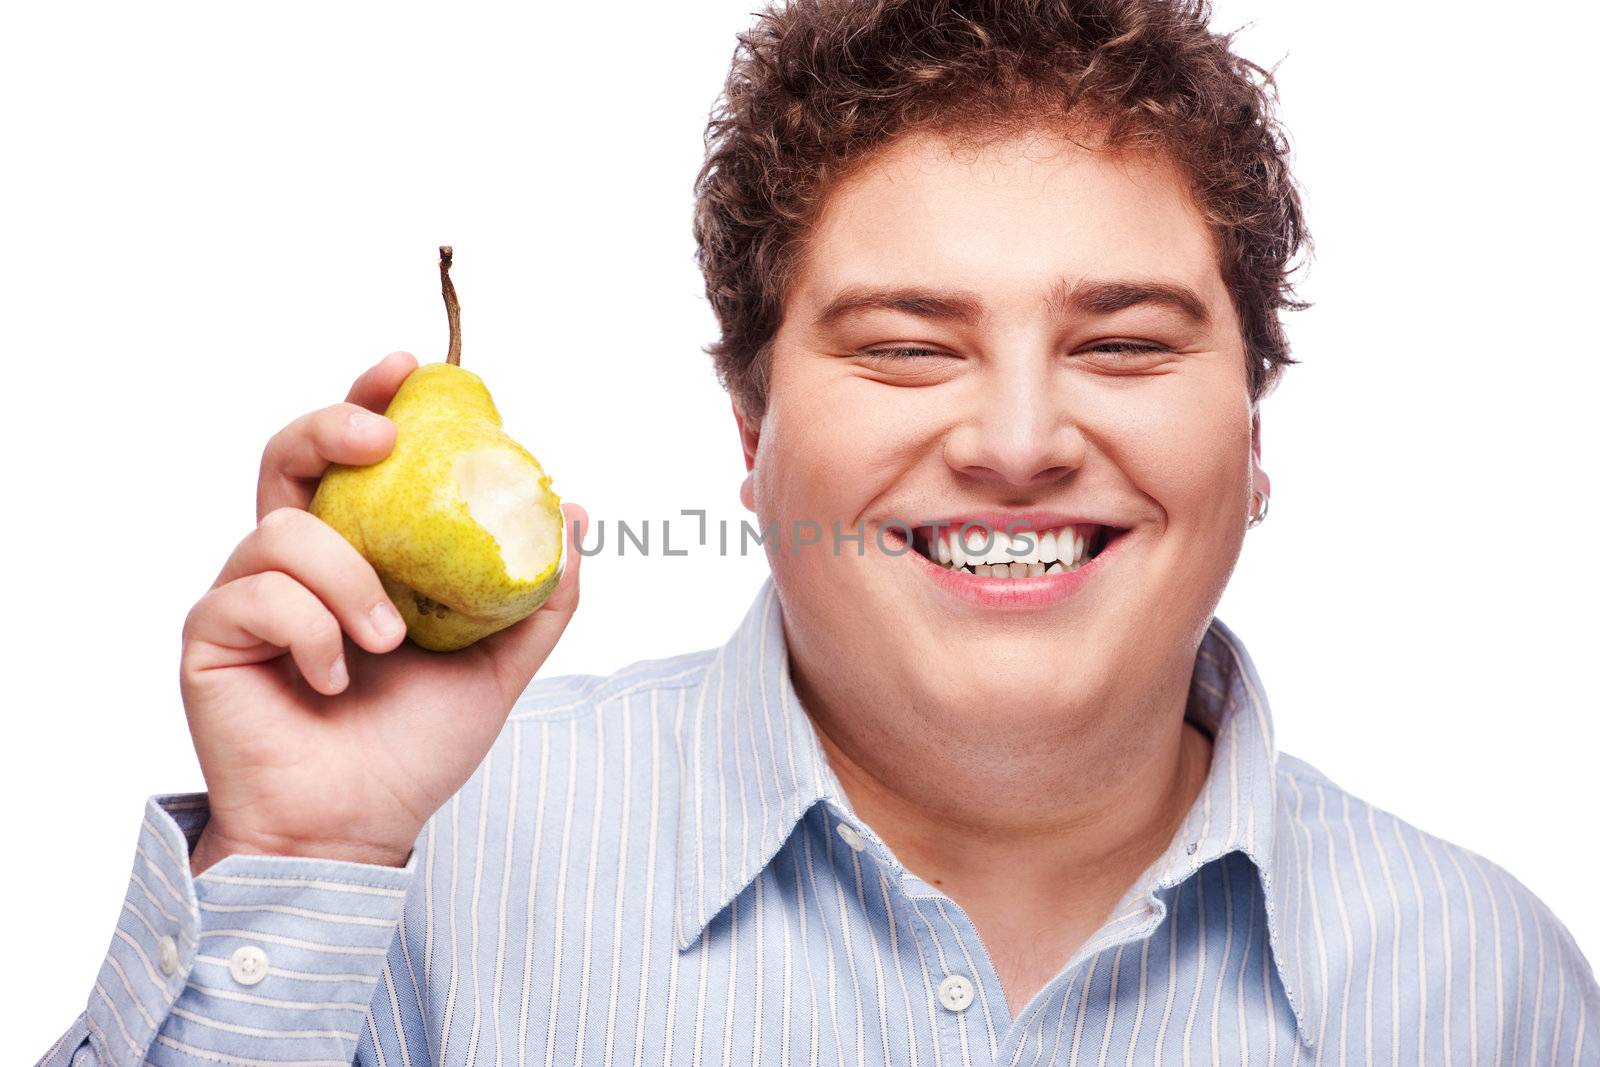 Chubby boy and pear by imarin